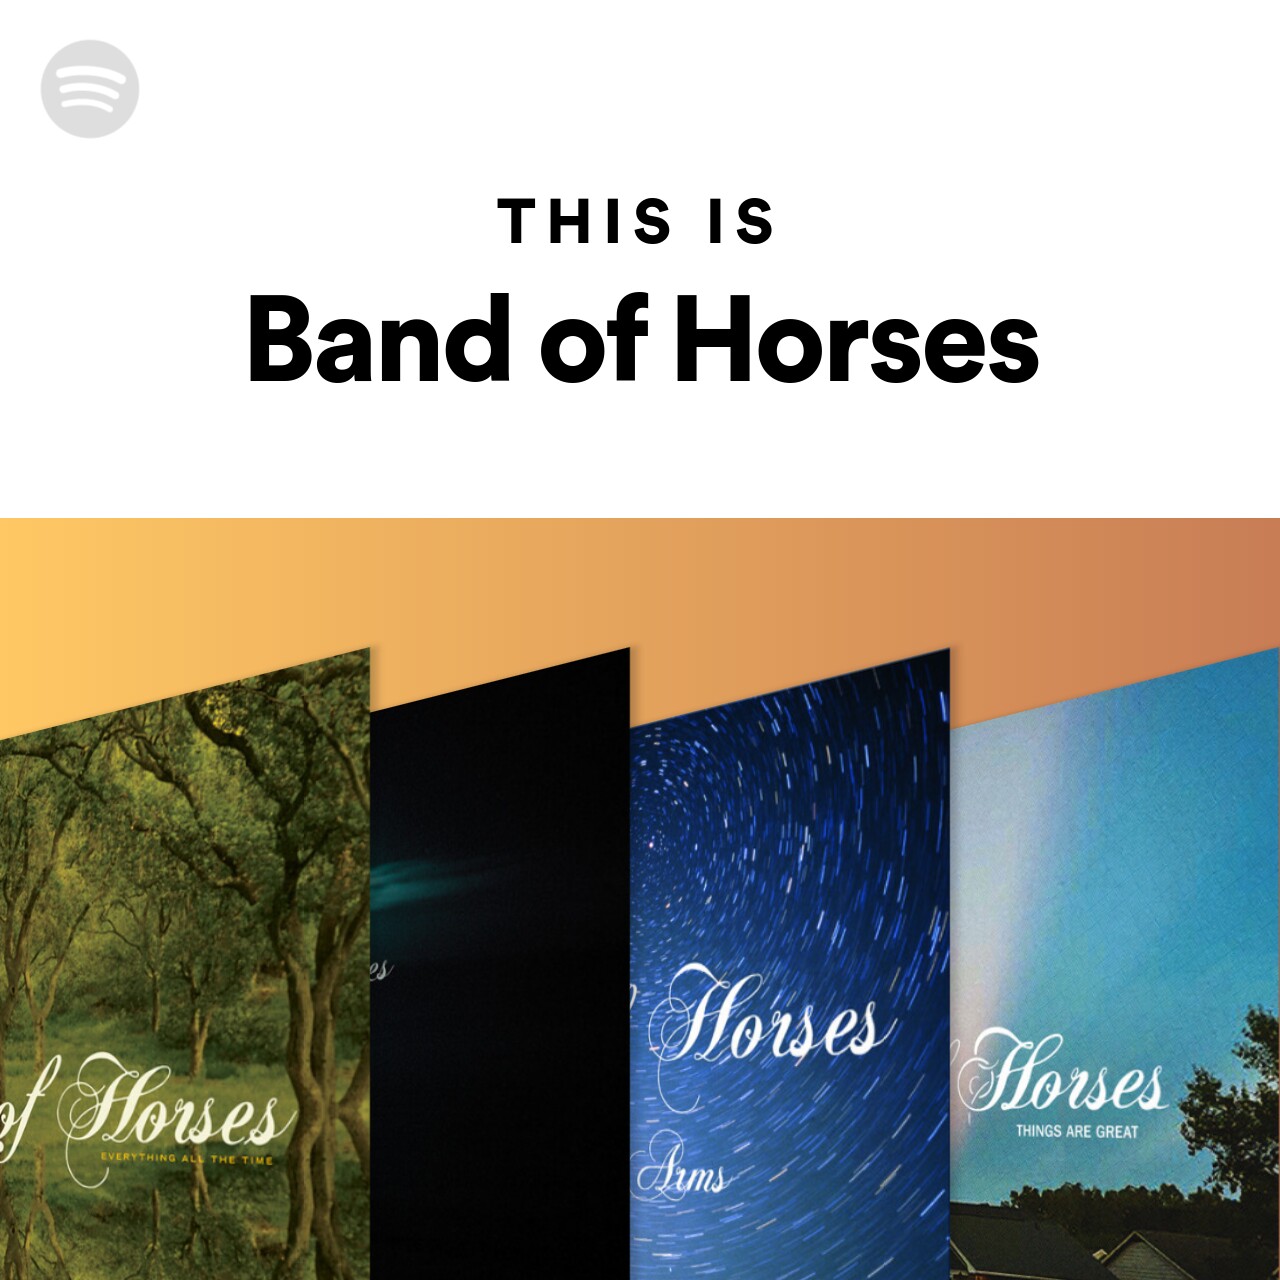 This Is Band of Horses